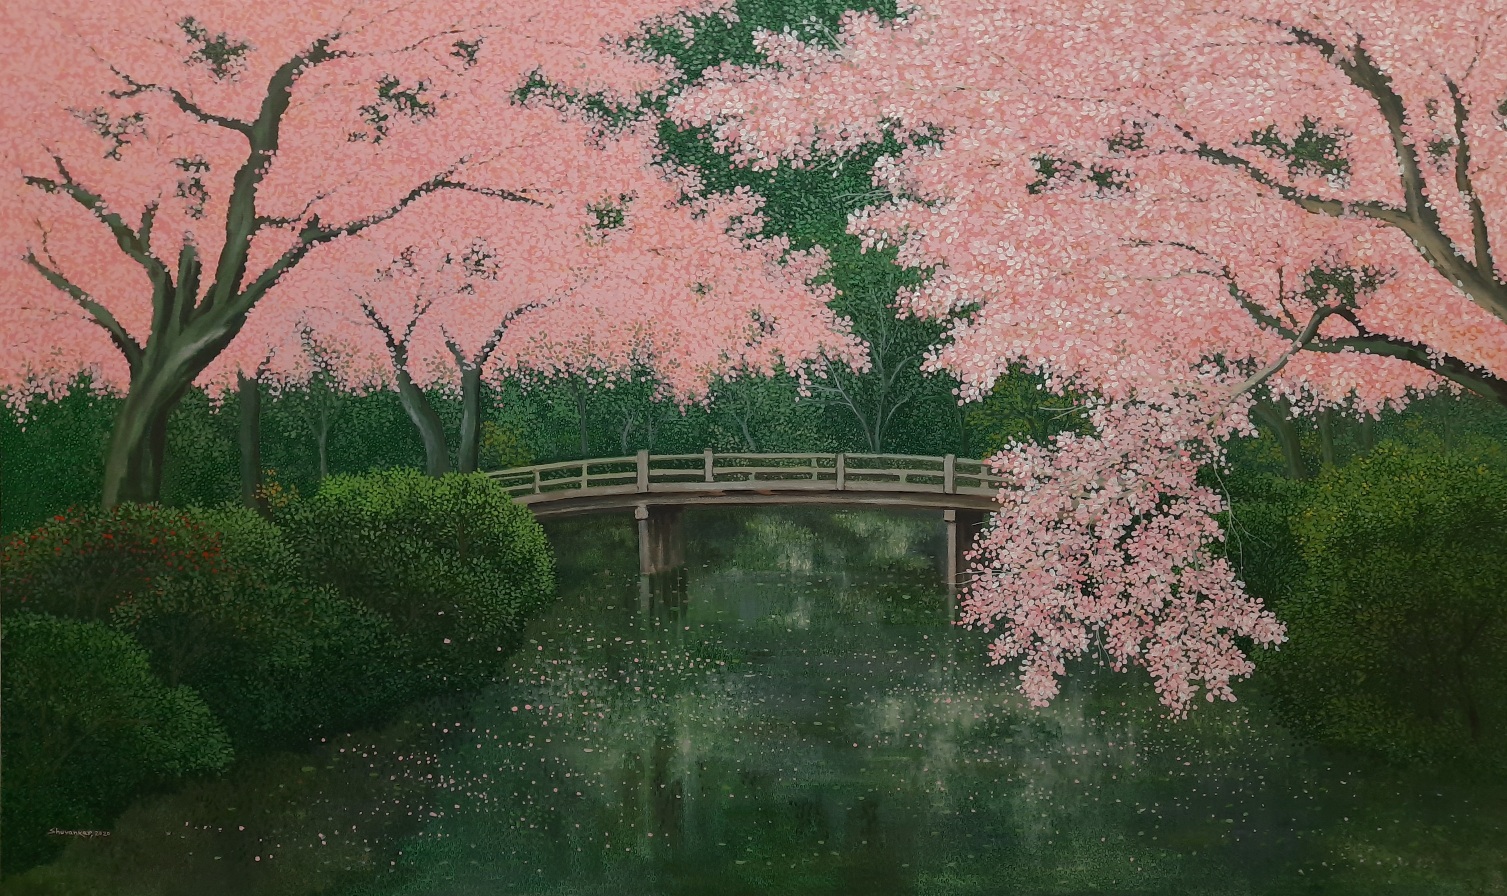 The Pink Blossoms 